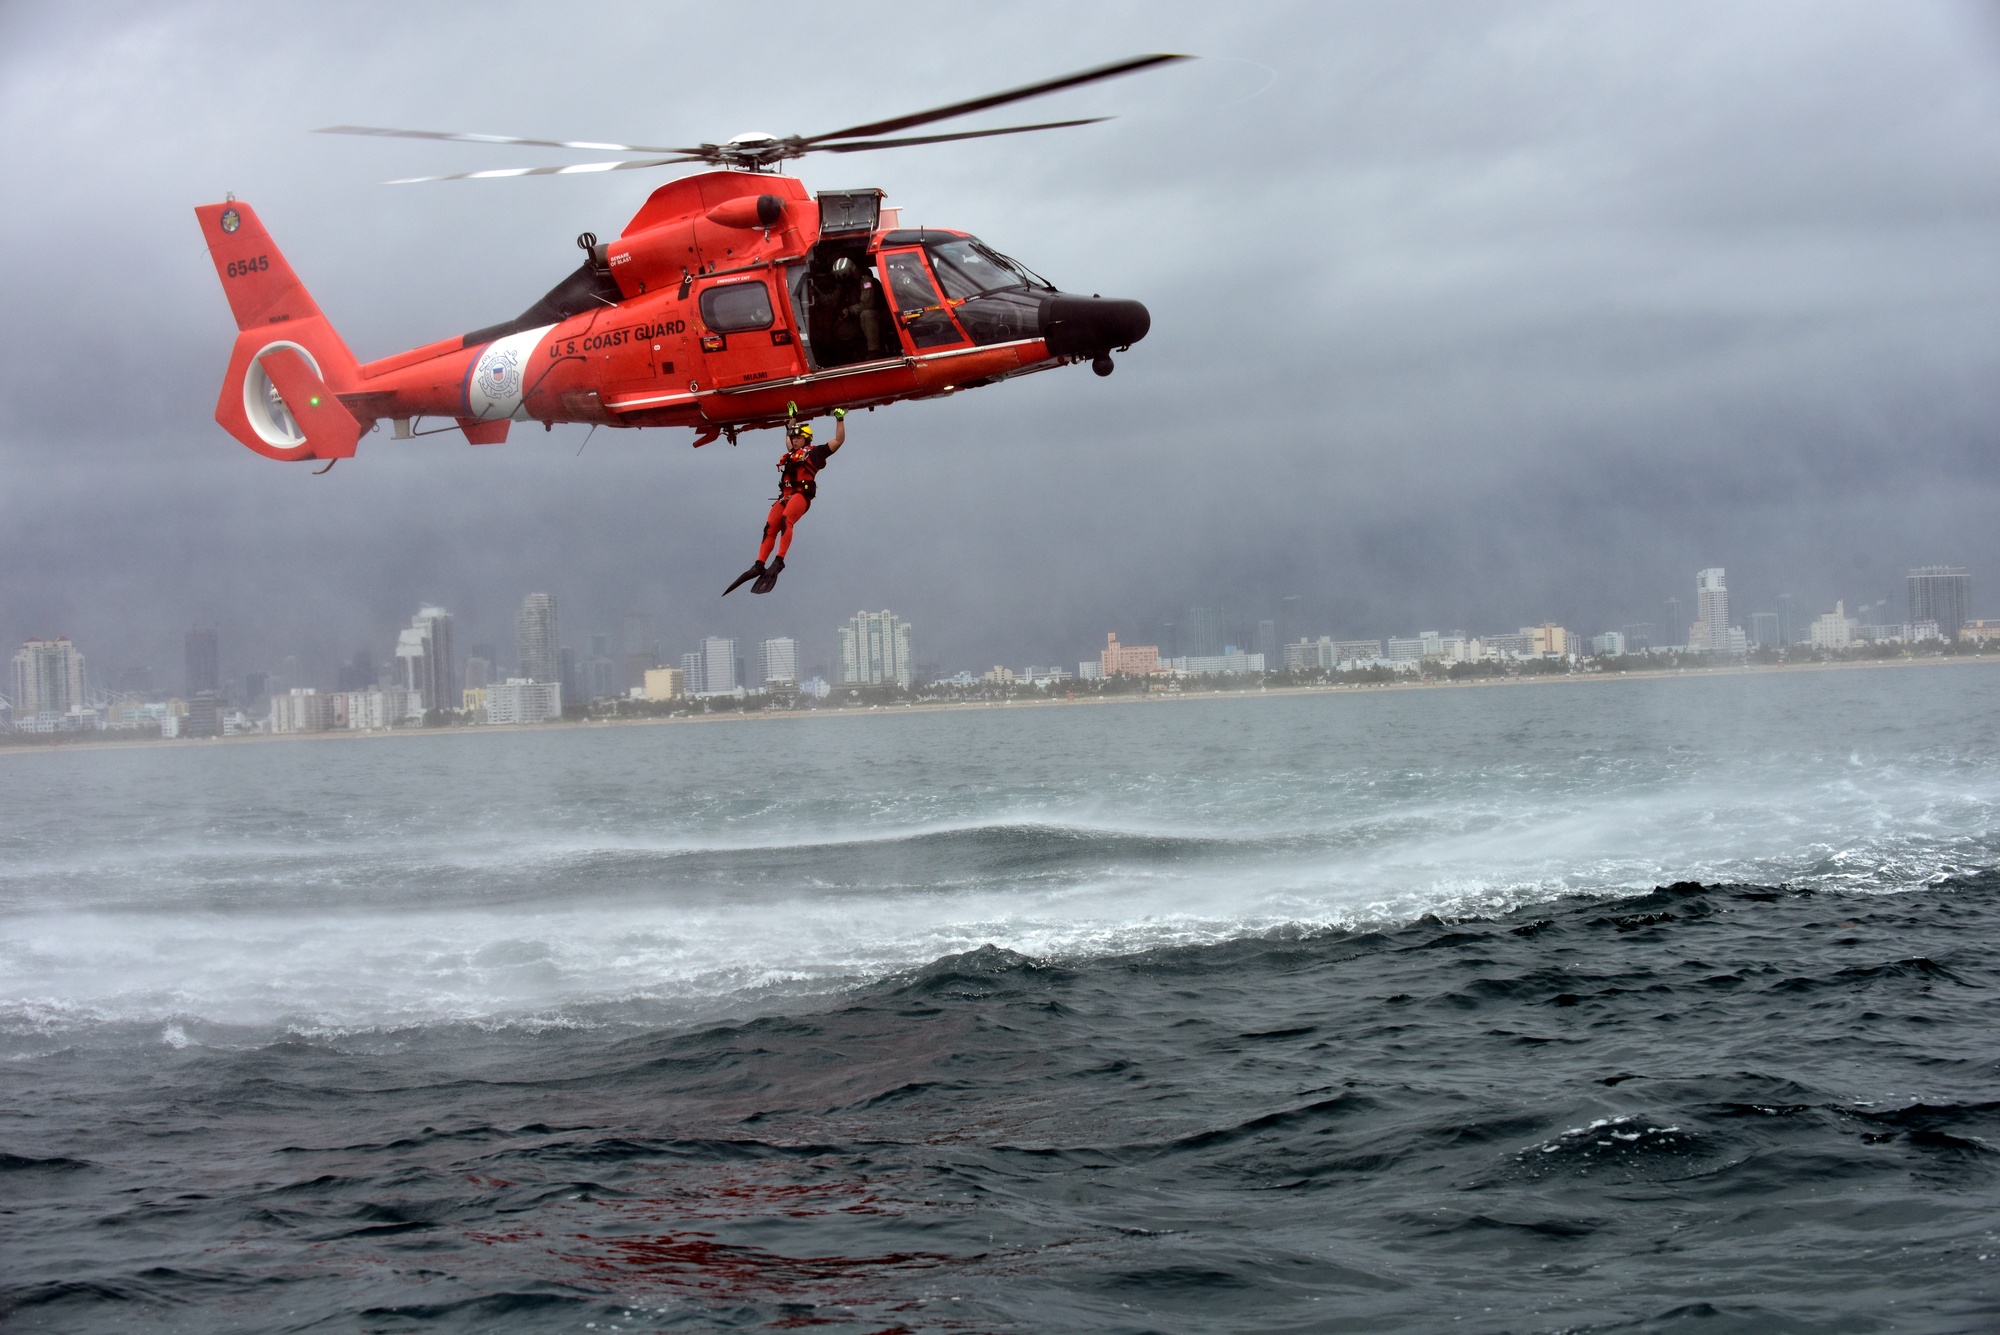 image Guard rescue swimmer conducts free fall deployment from helicopter [Image 7 of 14]